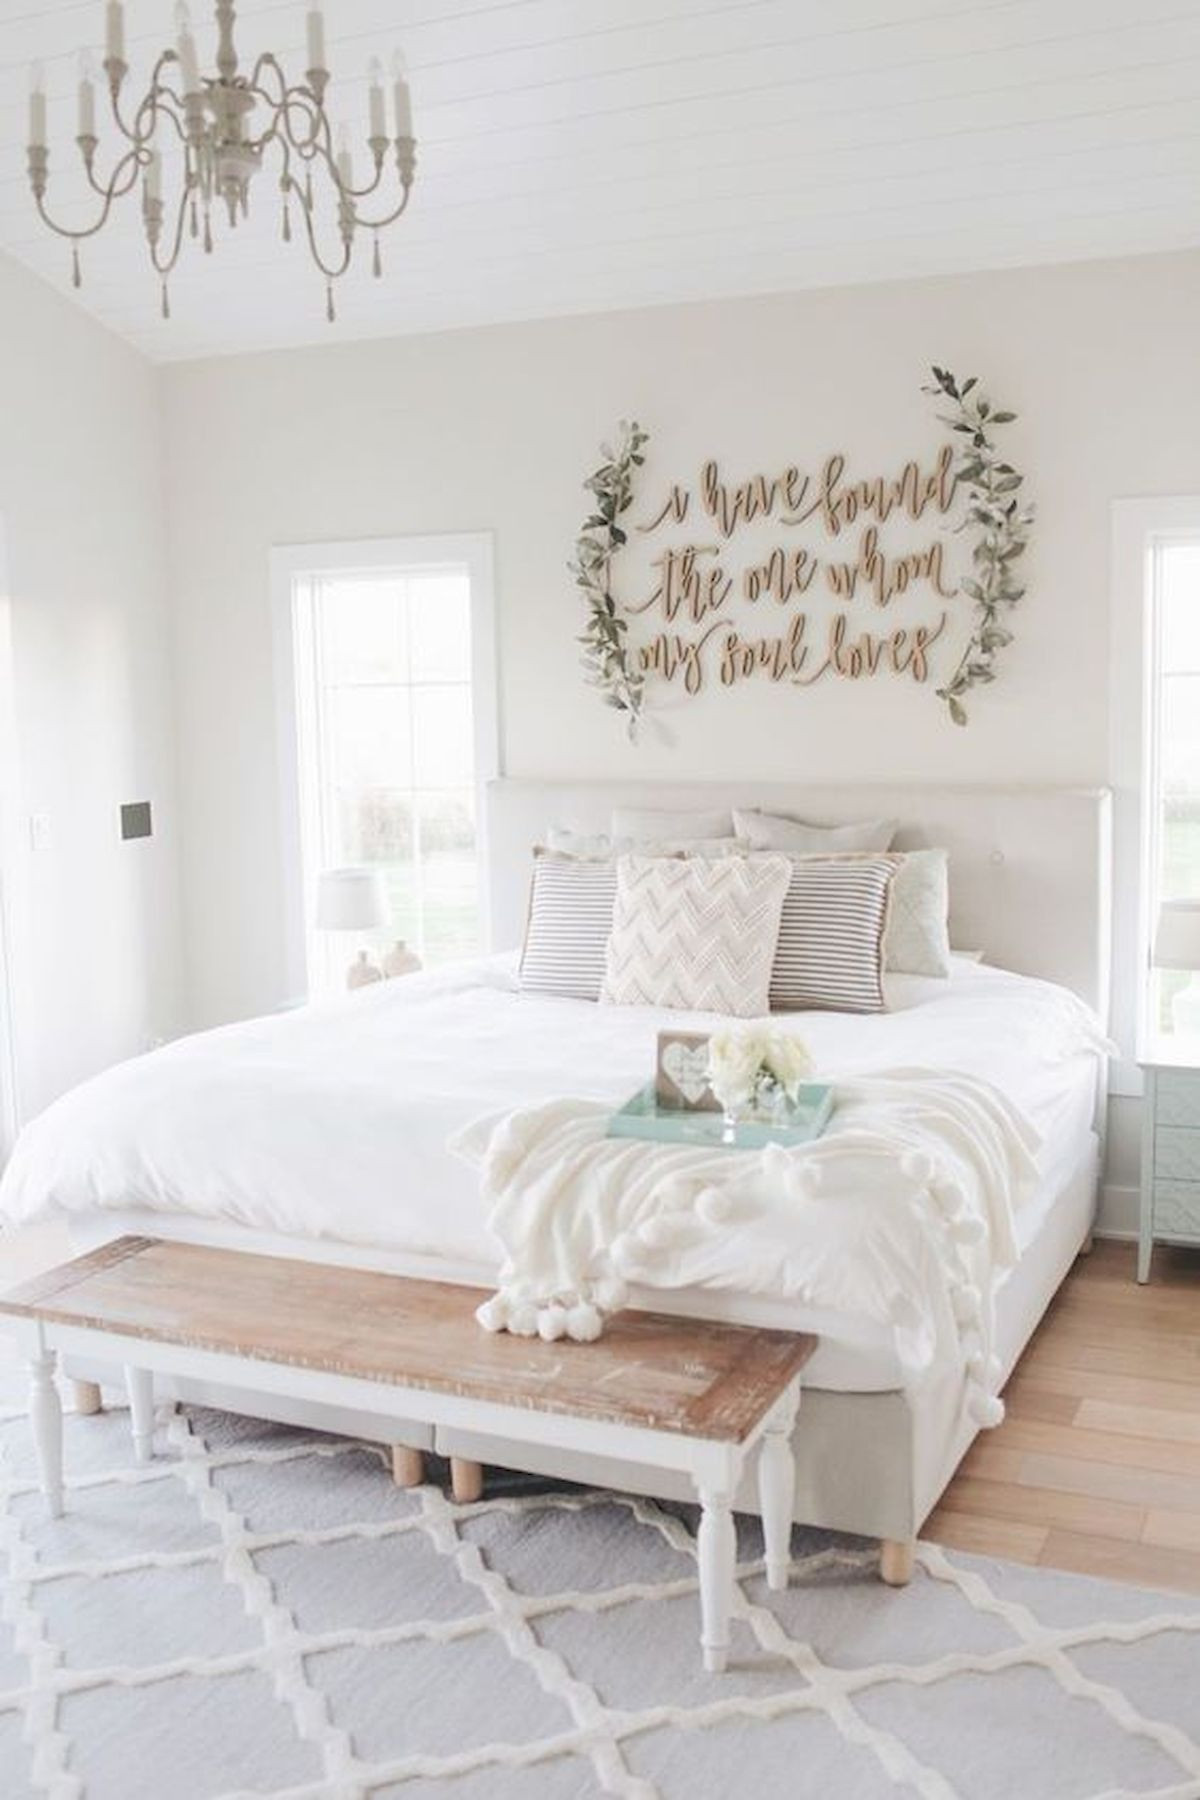 Bedroom Picture Wall Ideas
 53 Best Farmhouse Wall Decor Ideas for bedroom Ideaboz